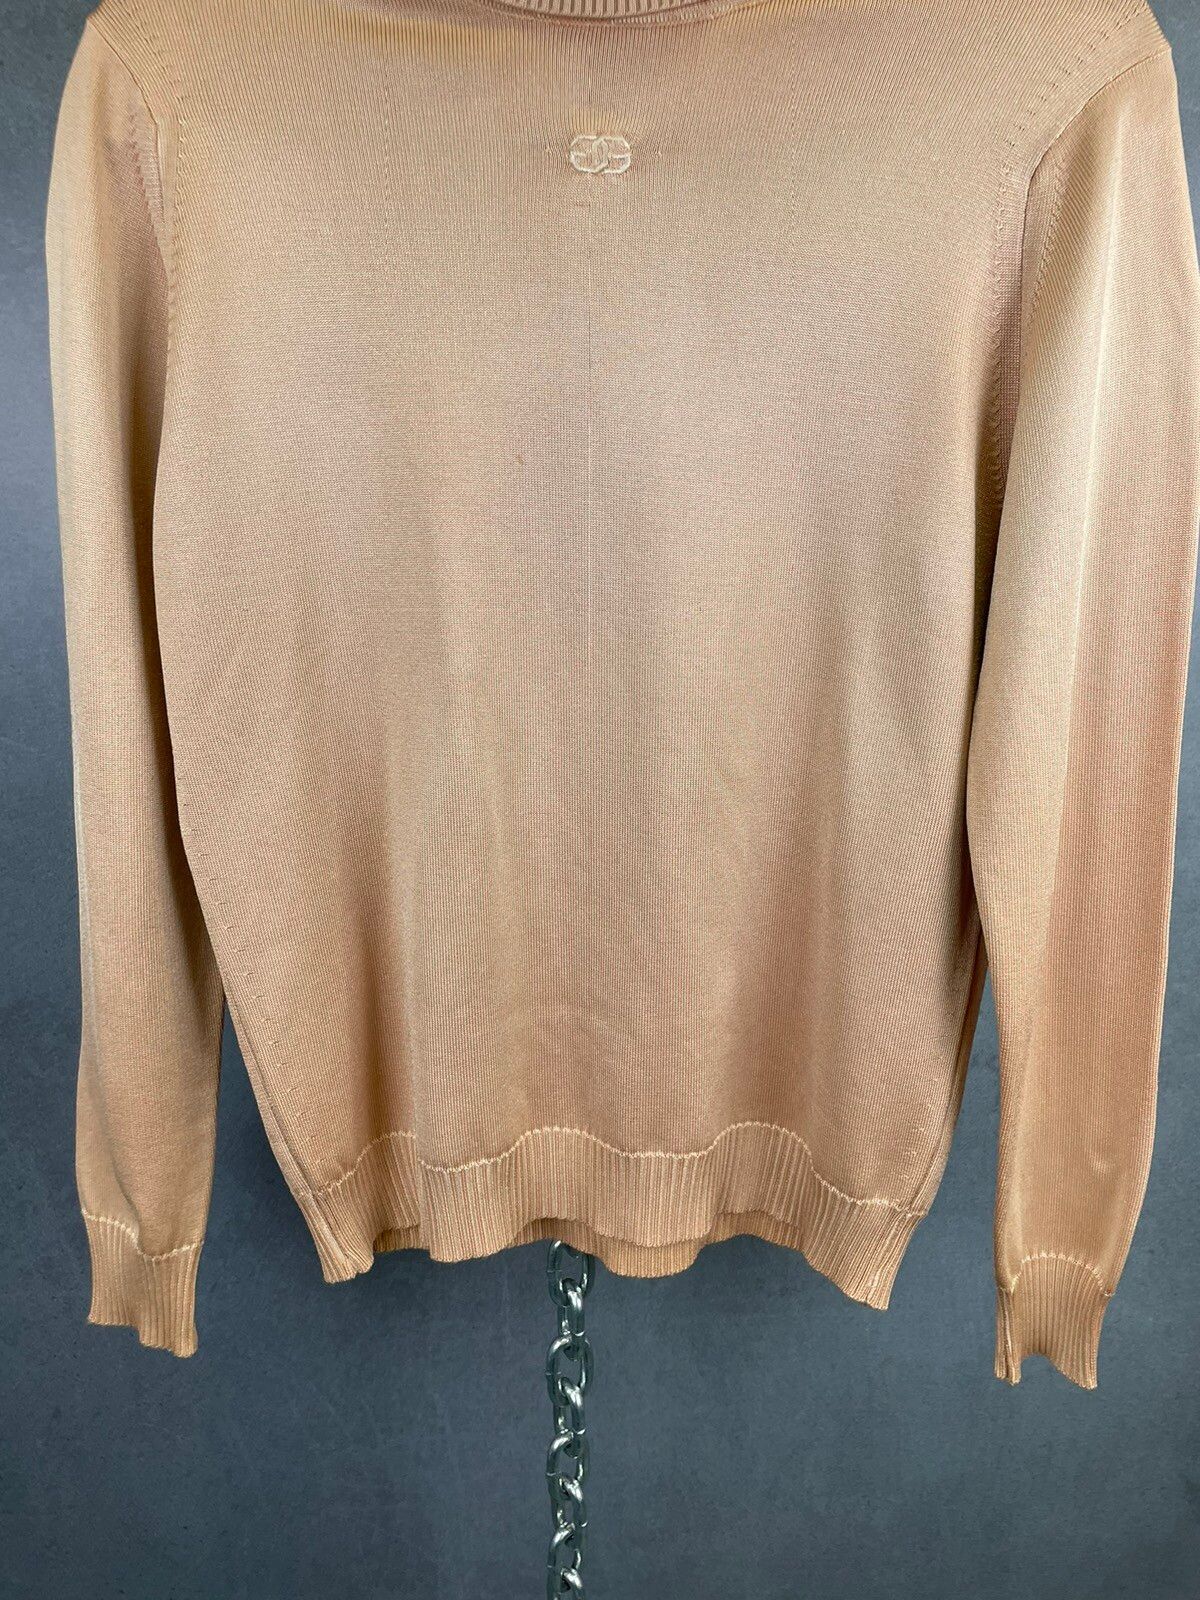 Givenchy Vintage 70s Givenchy Sport Tan Turtleneck Top Size 38 Size S / US 4 / IT 40 - 3 Thumbnail